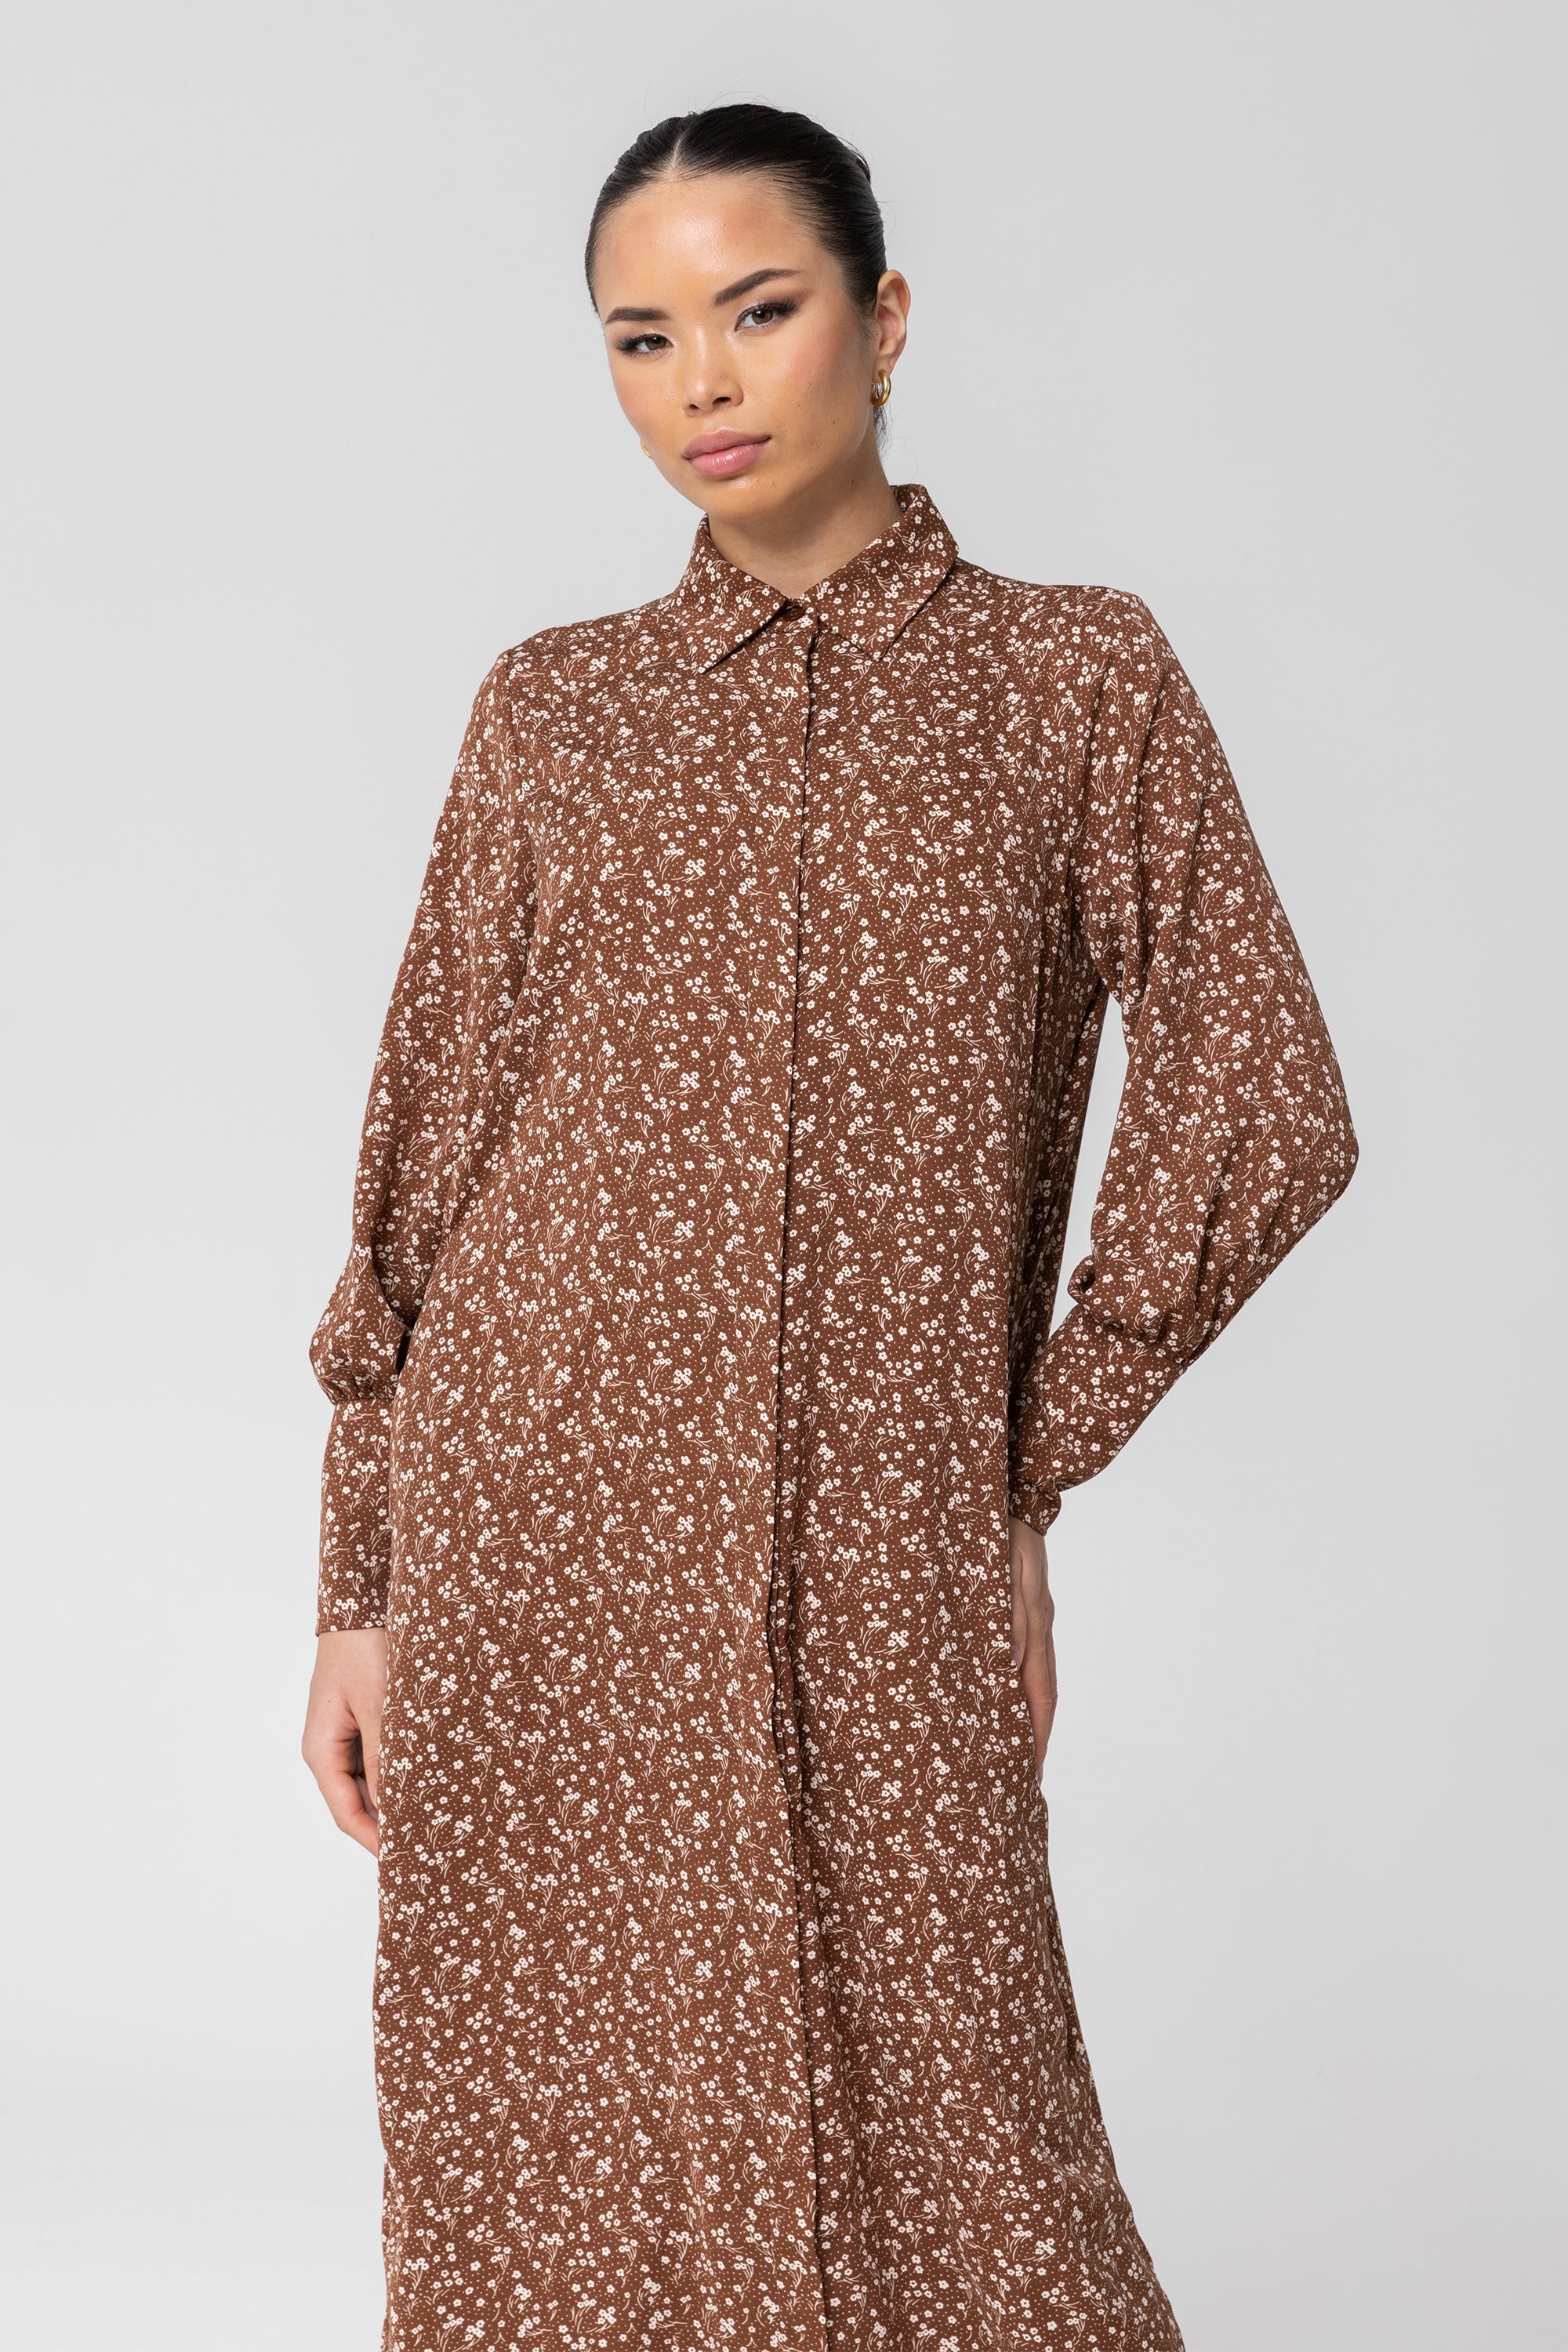 Brown Floral Button Down Maxi Shirt Dress Veiled Collection 